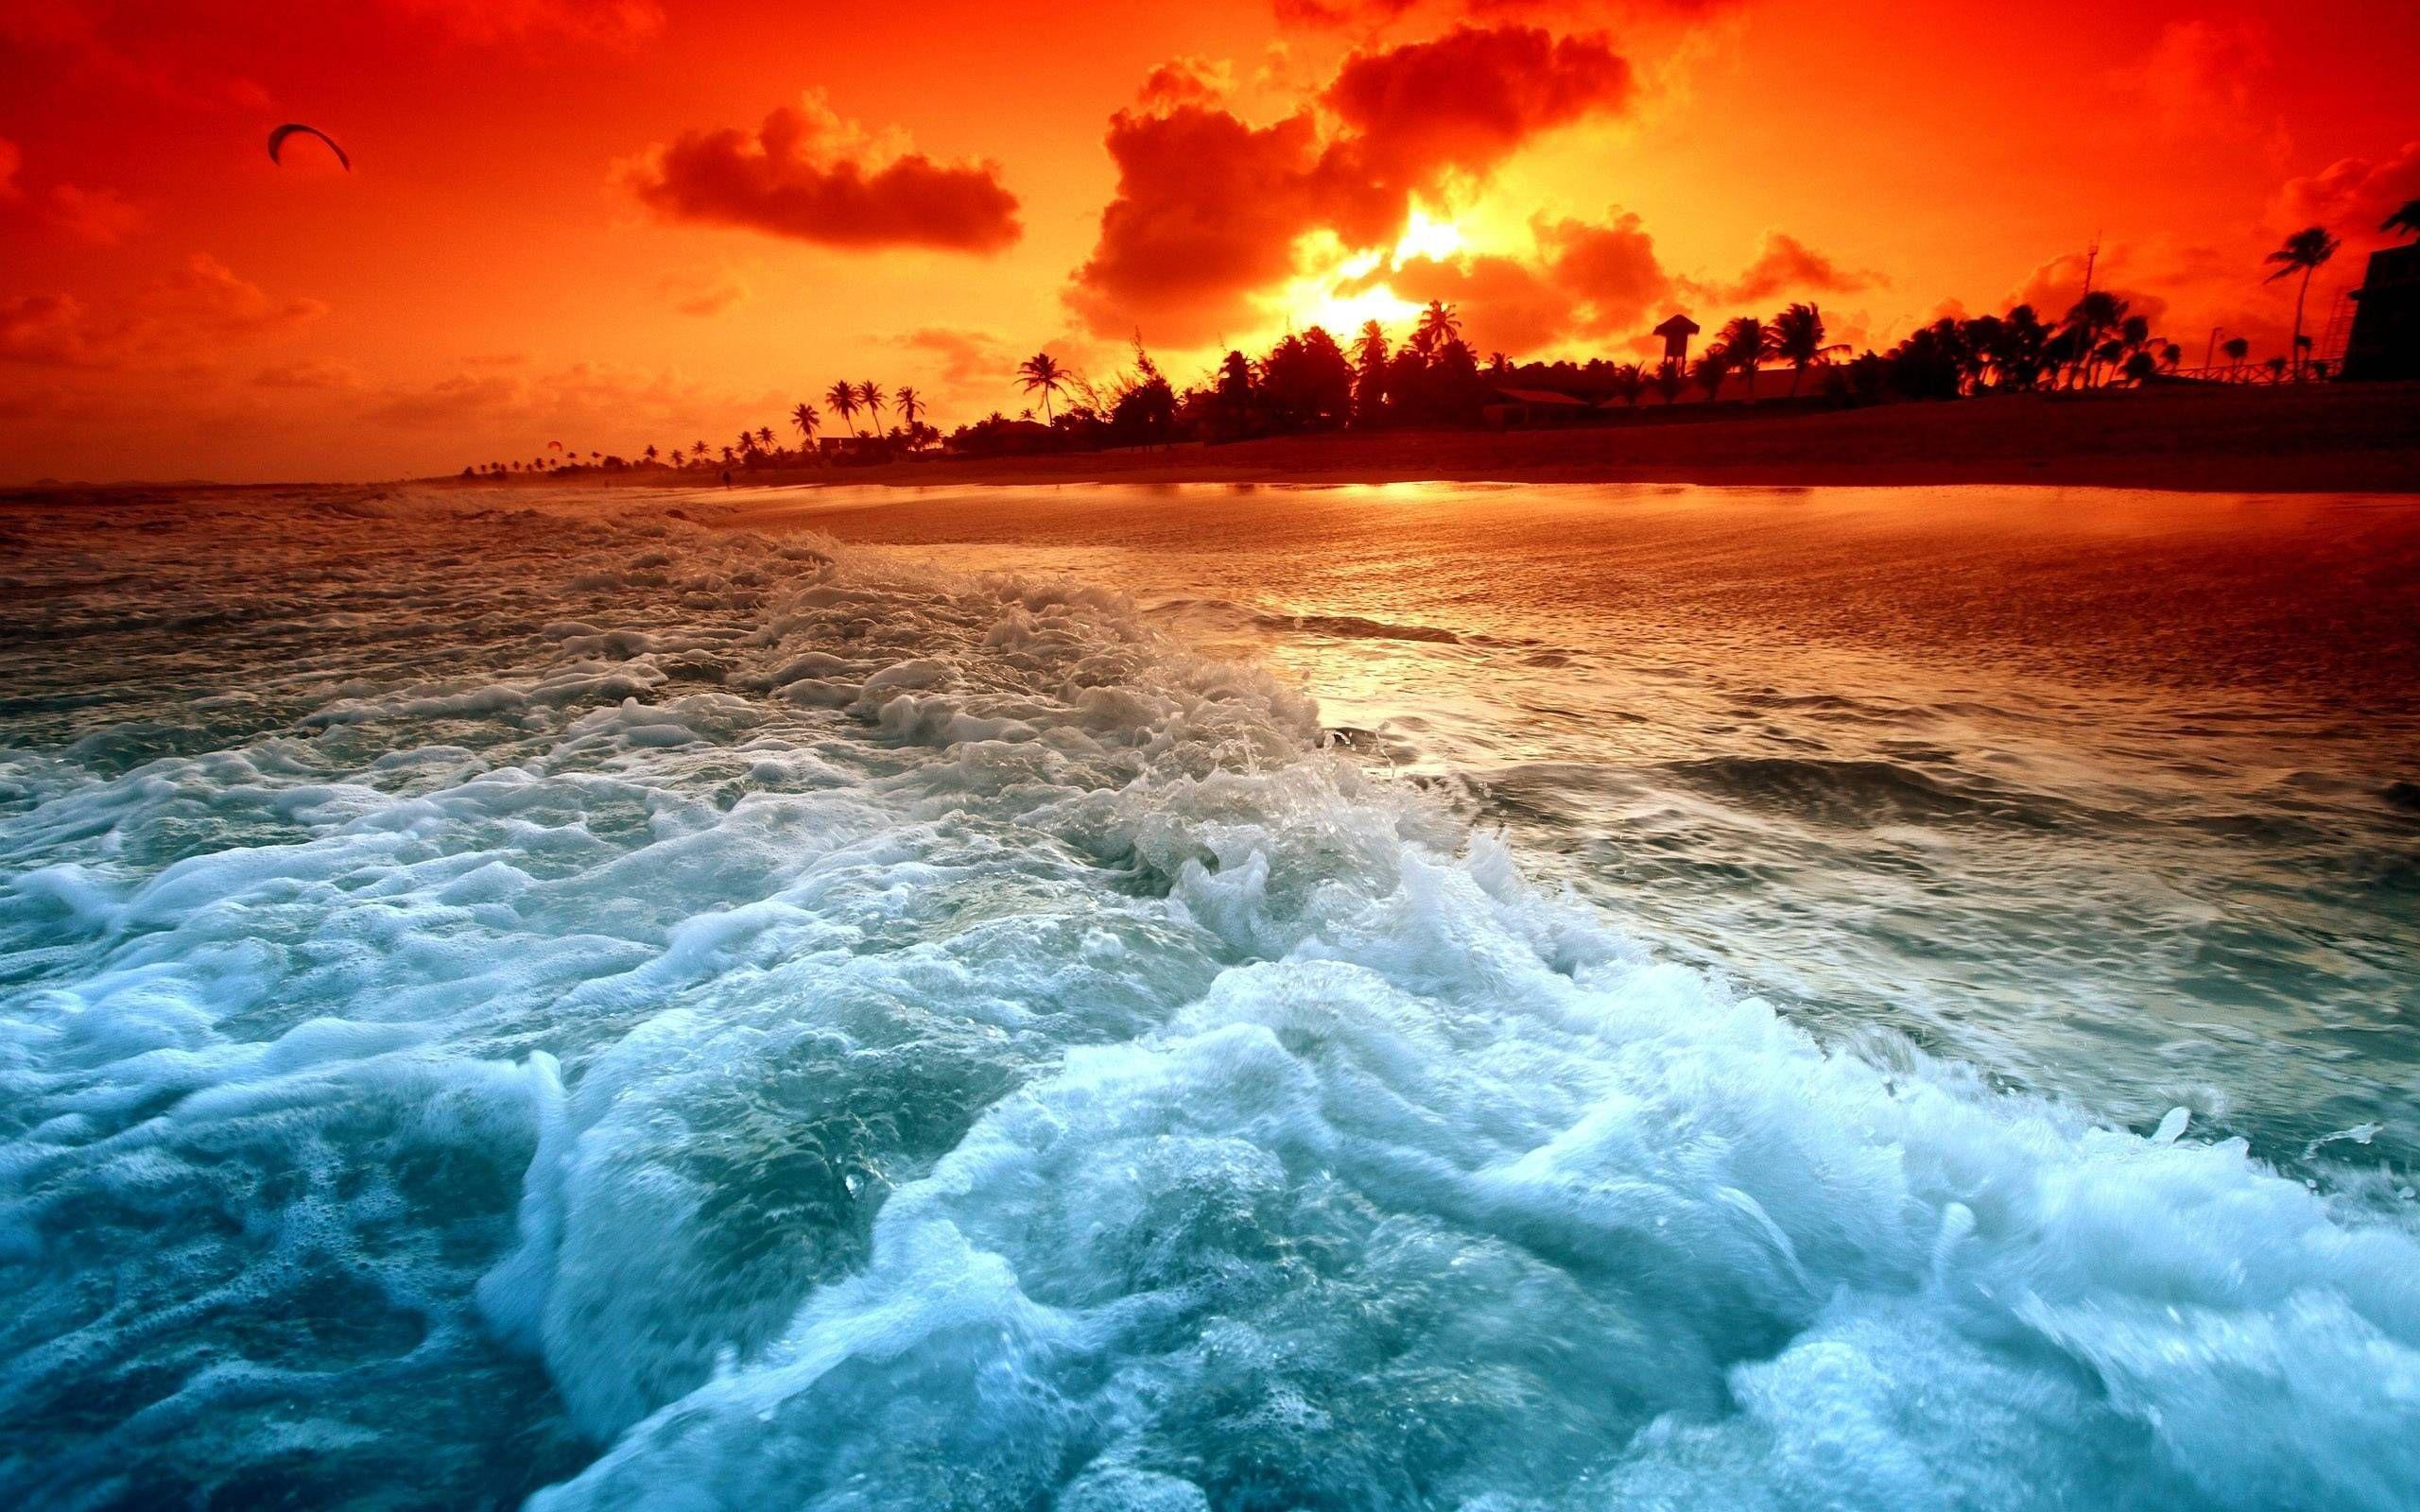 Beautiful Ocean Sunset Wallpaper for PC. Full HD Picture. All